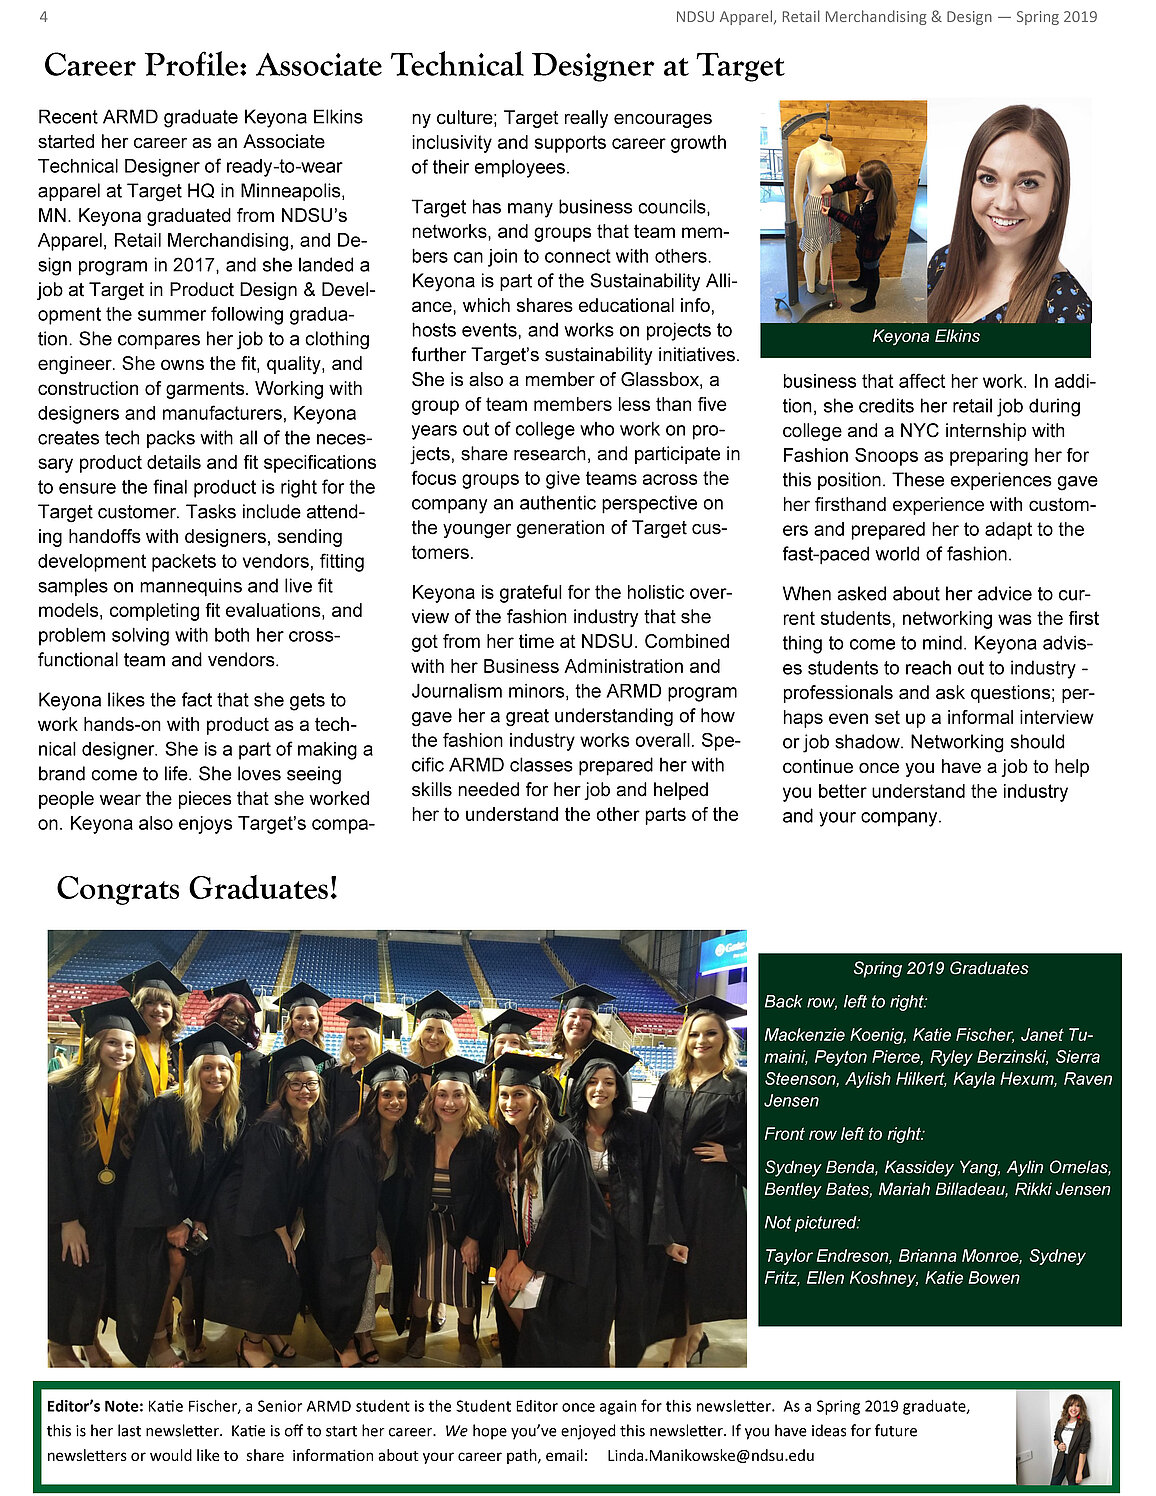 Page four of newsletter